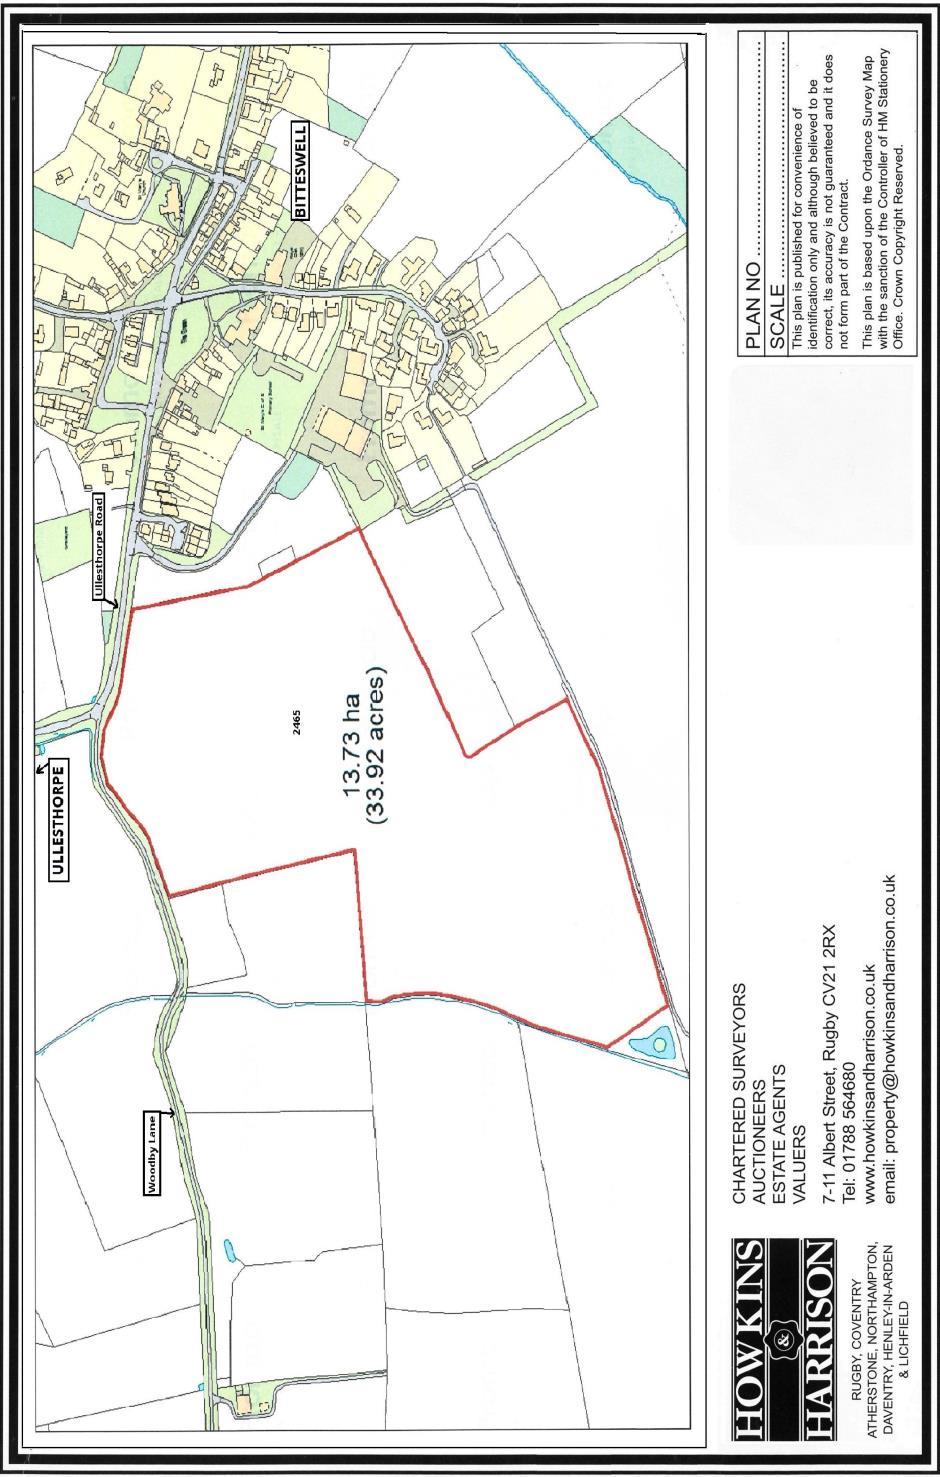 LEICESTERSHIRE NEW INSTRUCTION LAND AT BITTESWELL (KNOWN AS HUBBARDS) LEICESTERSHIRE MR S HAYNES Sale of approximately 33 Acres of Grass 1 2465 33.92 13.